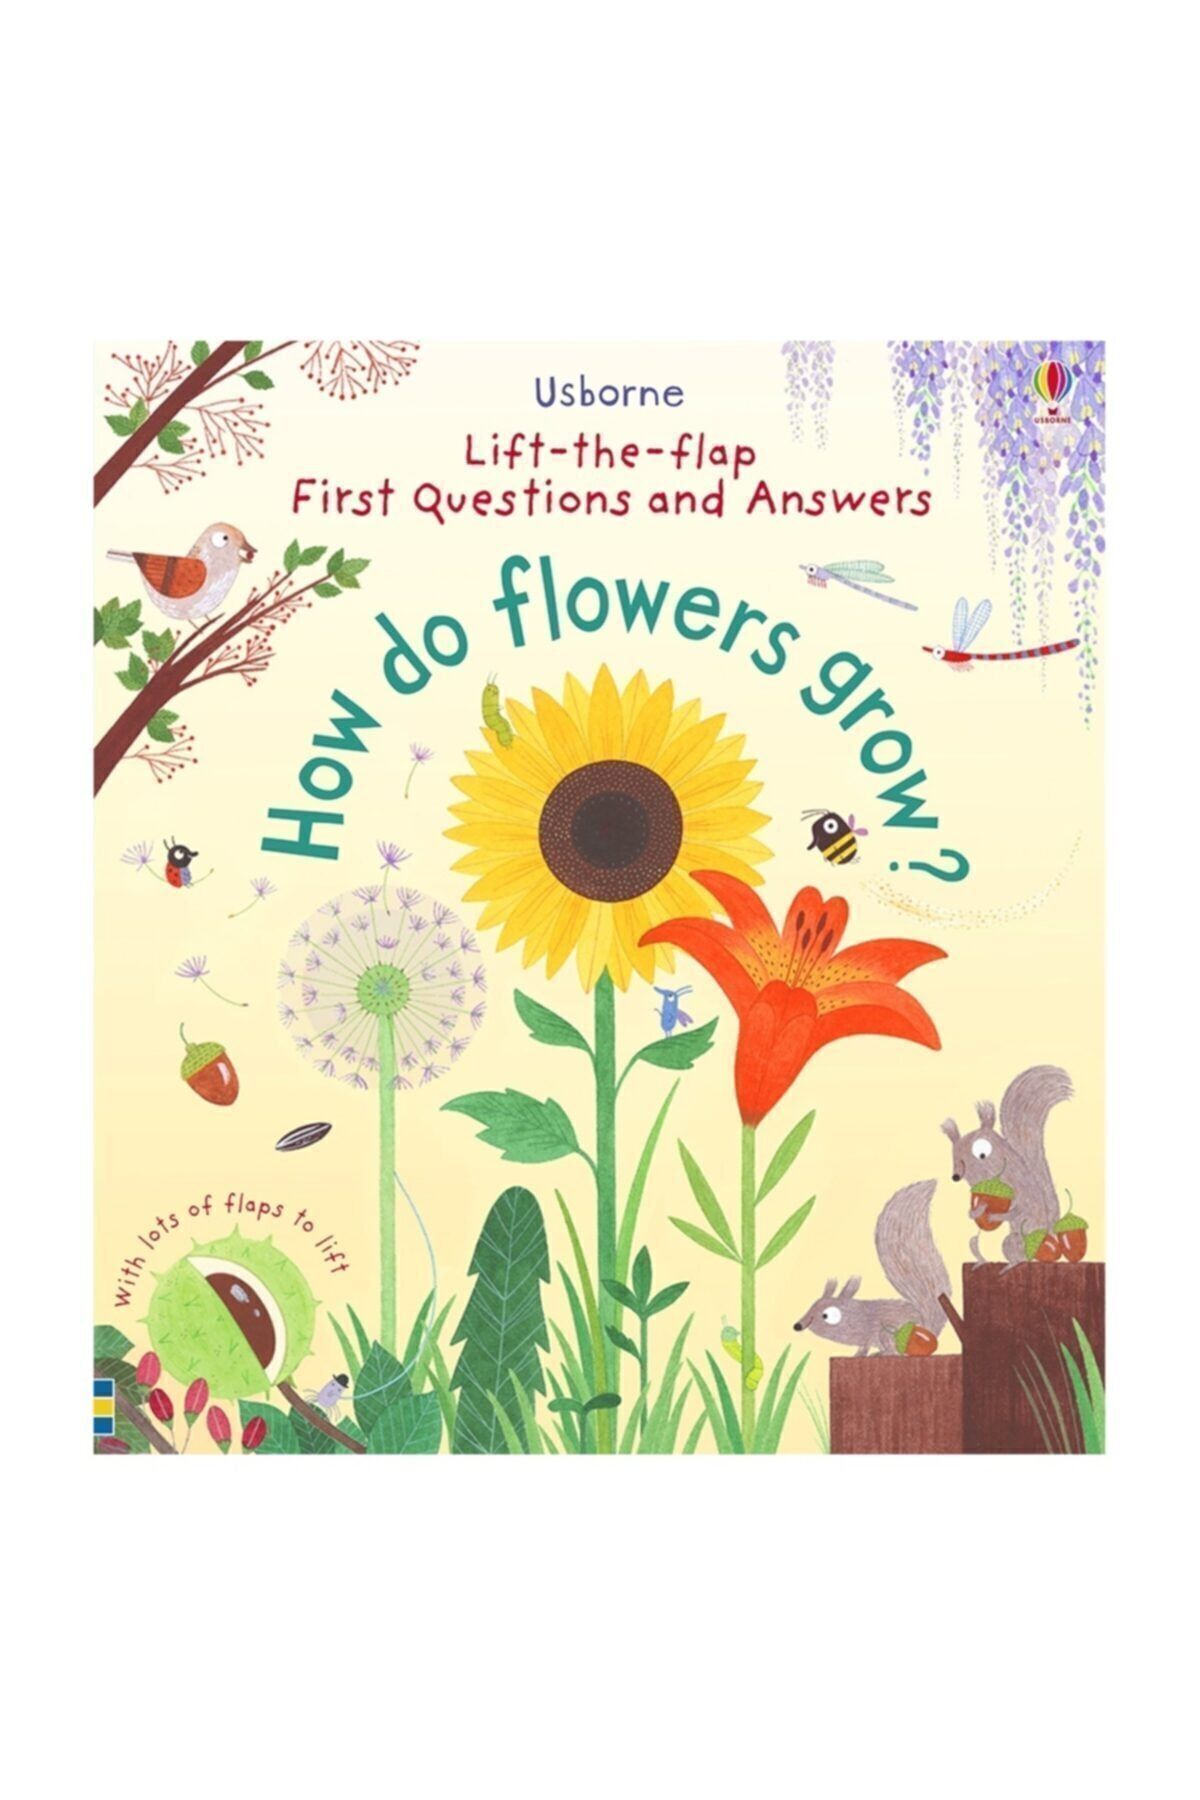 Usborne How Do Flowers Grow ? Lift-the-flap First Questions And Answers